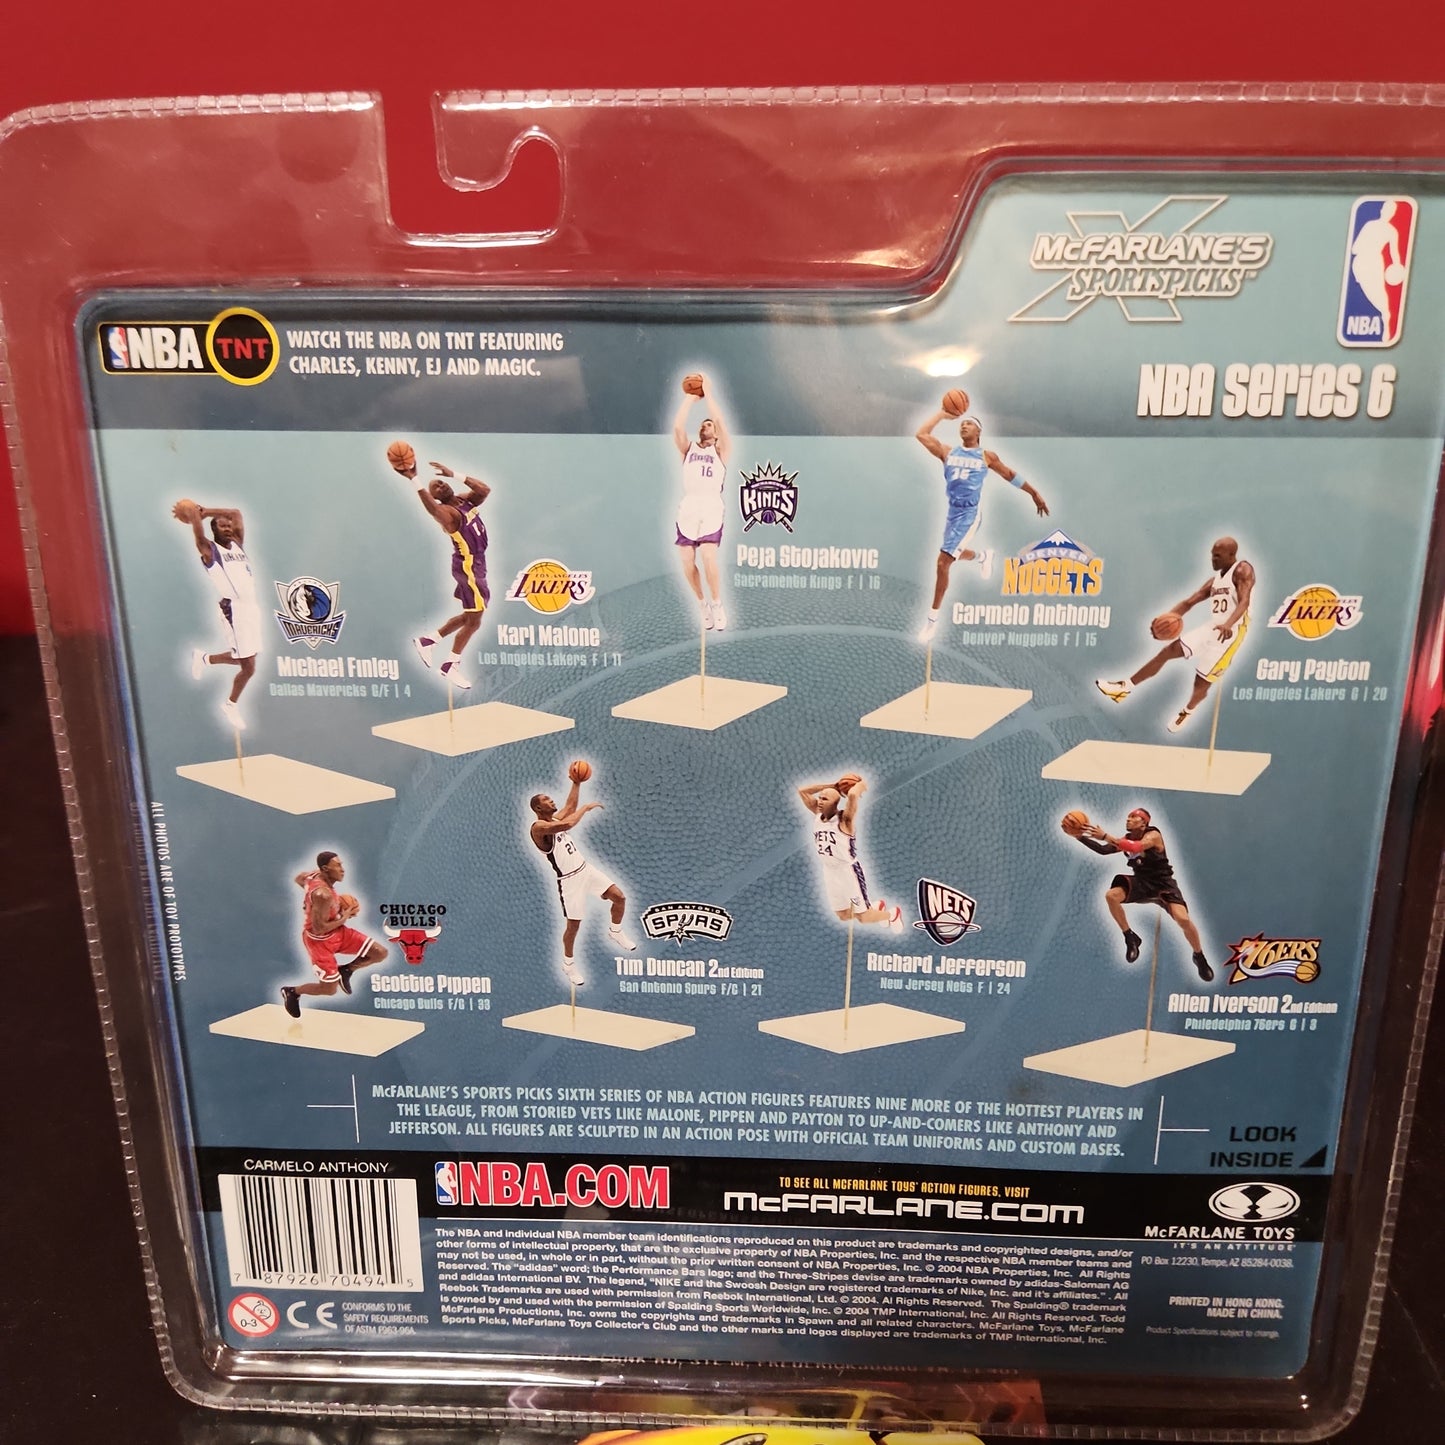 Denver Nuggets Carmelo Anthony Action Figure Variant McFarlane Toys NBA Series 6